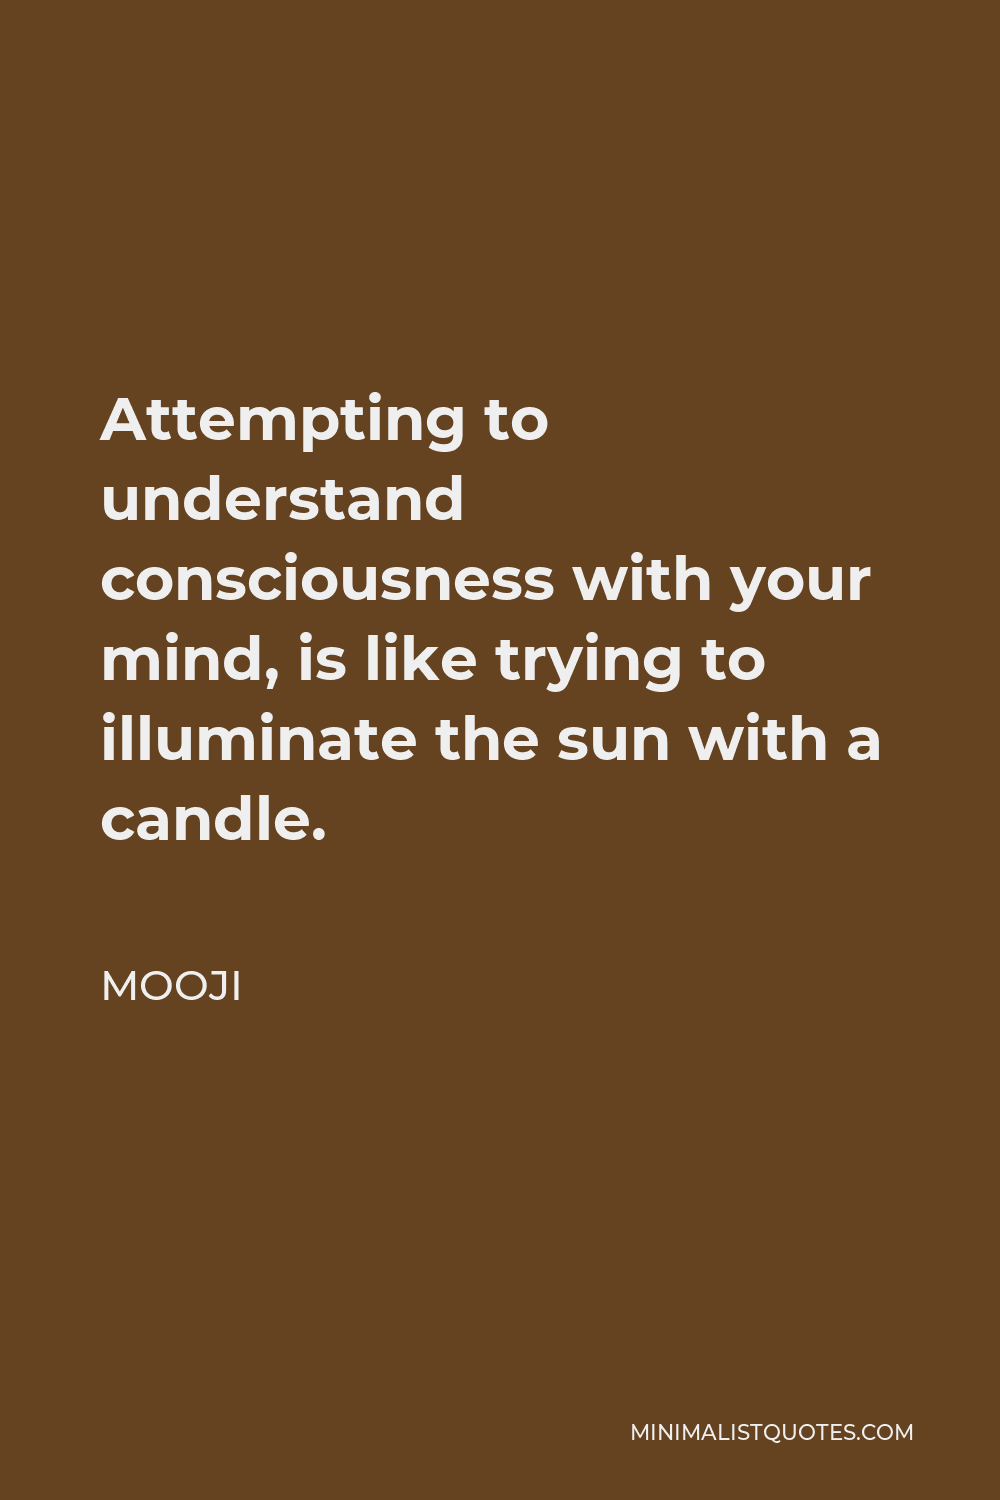 Mooji Quote - Attempting to understand consciousness with your mind, is like trying to illuminate the sun with a candle.